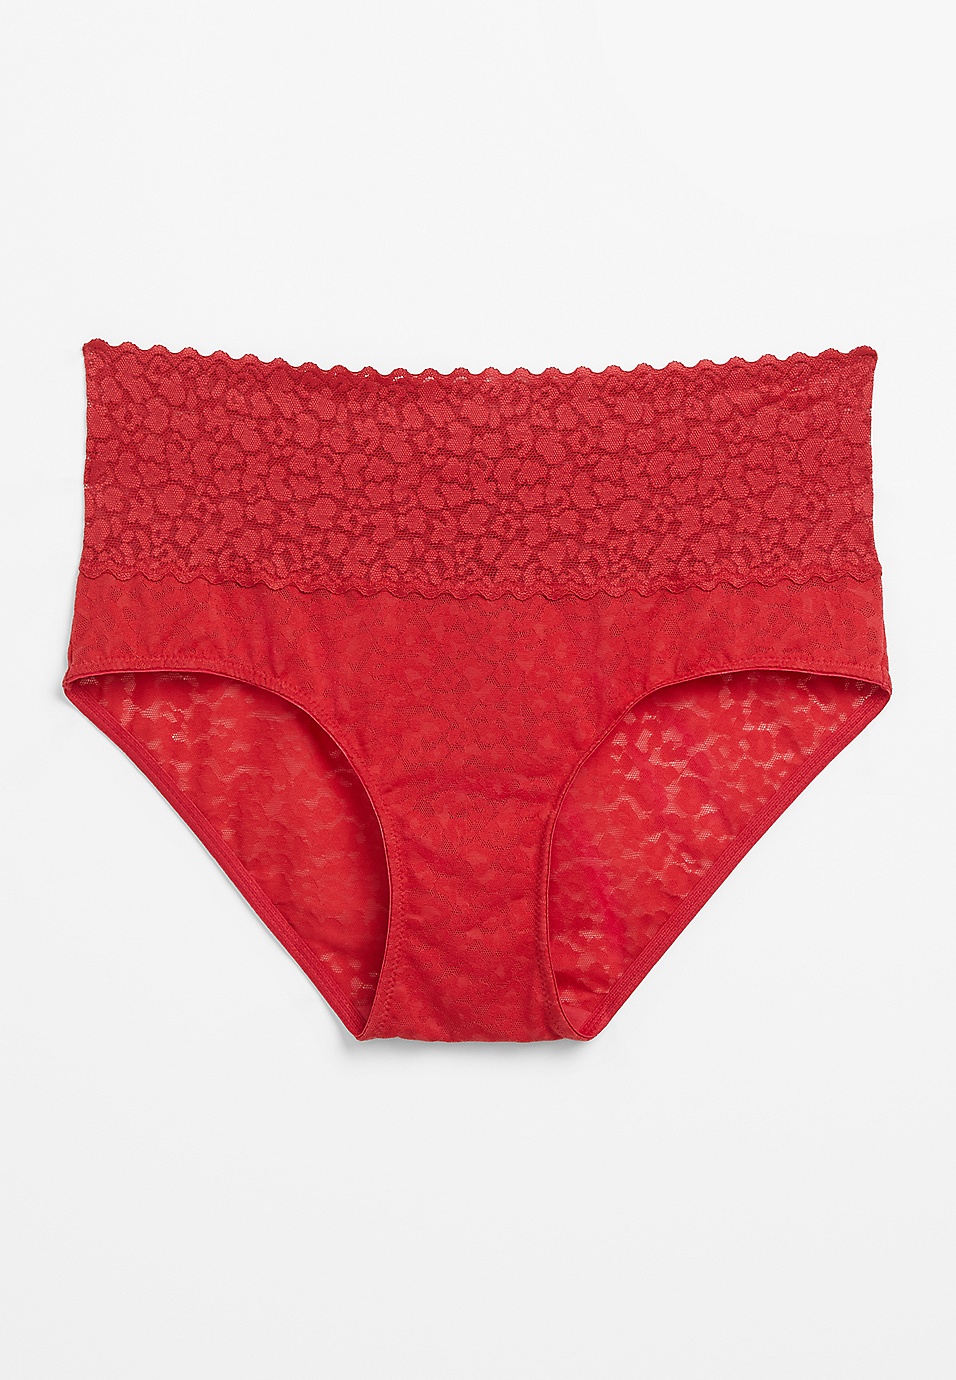 Hipster Panty China Trade,Buy China Direct From Hipster Panty Factories at